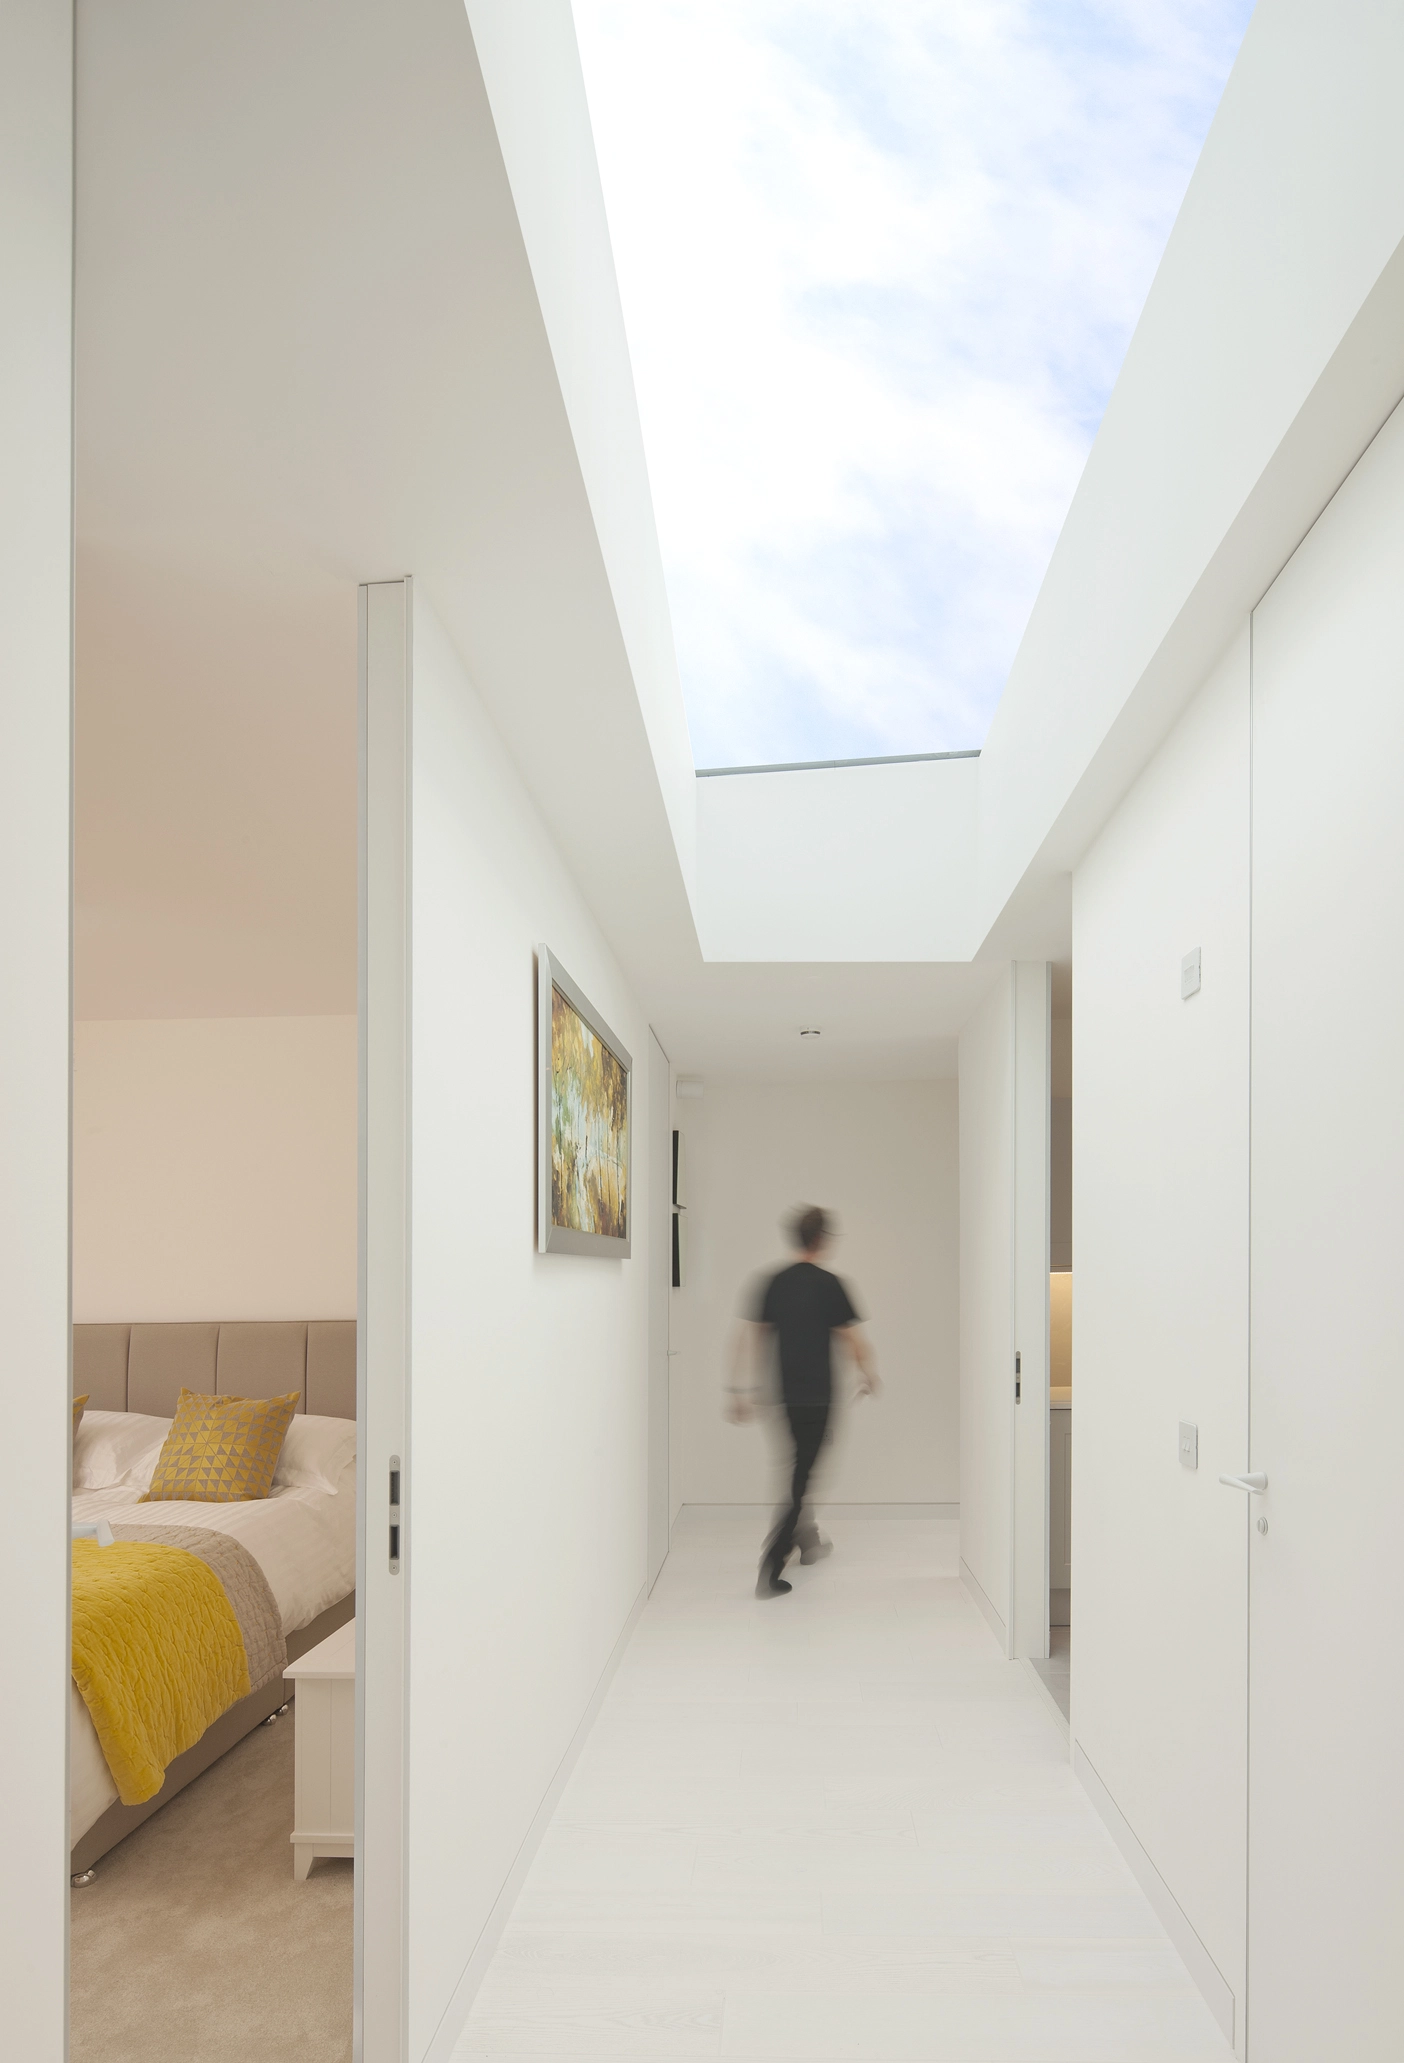 A white corridor space with a large rooflight right above it providing natural light and views towards the blue sky, doors scantly opened showcase the colourful bedrooms on the inside.